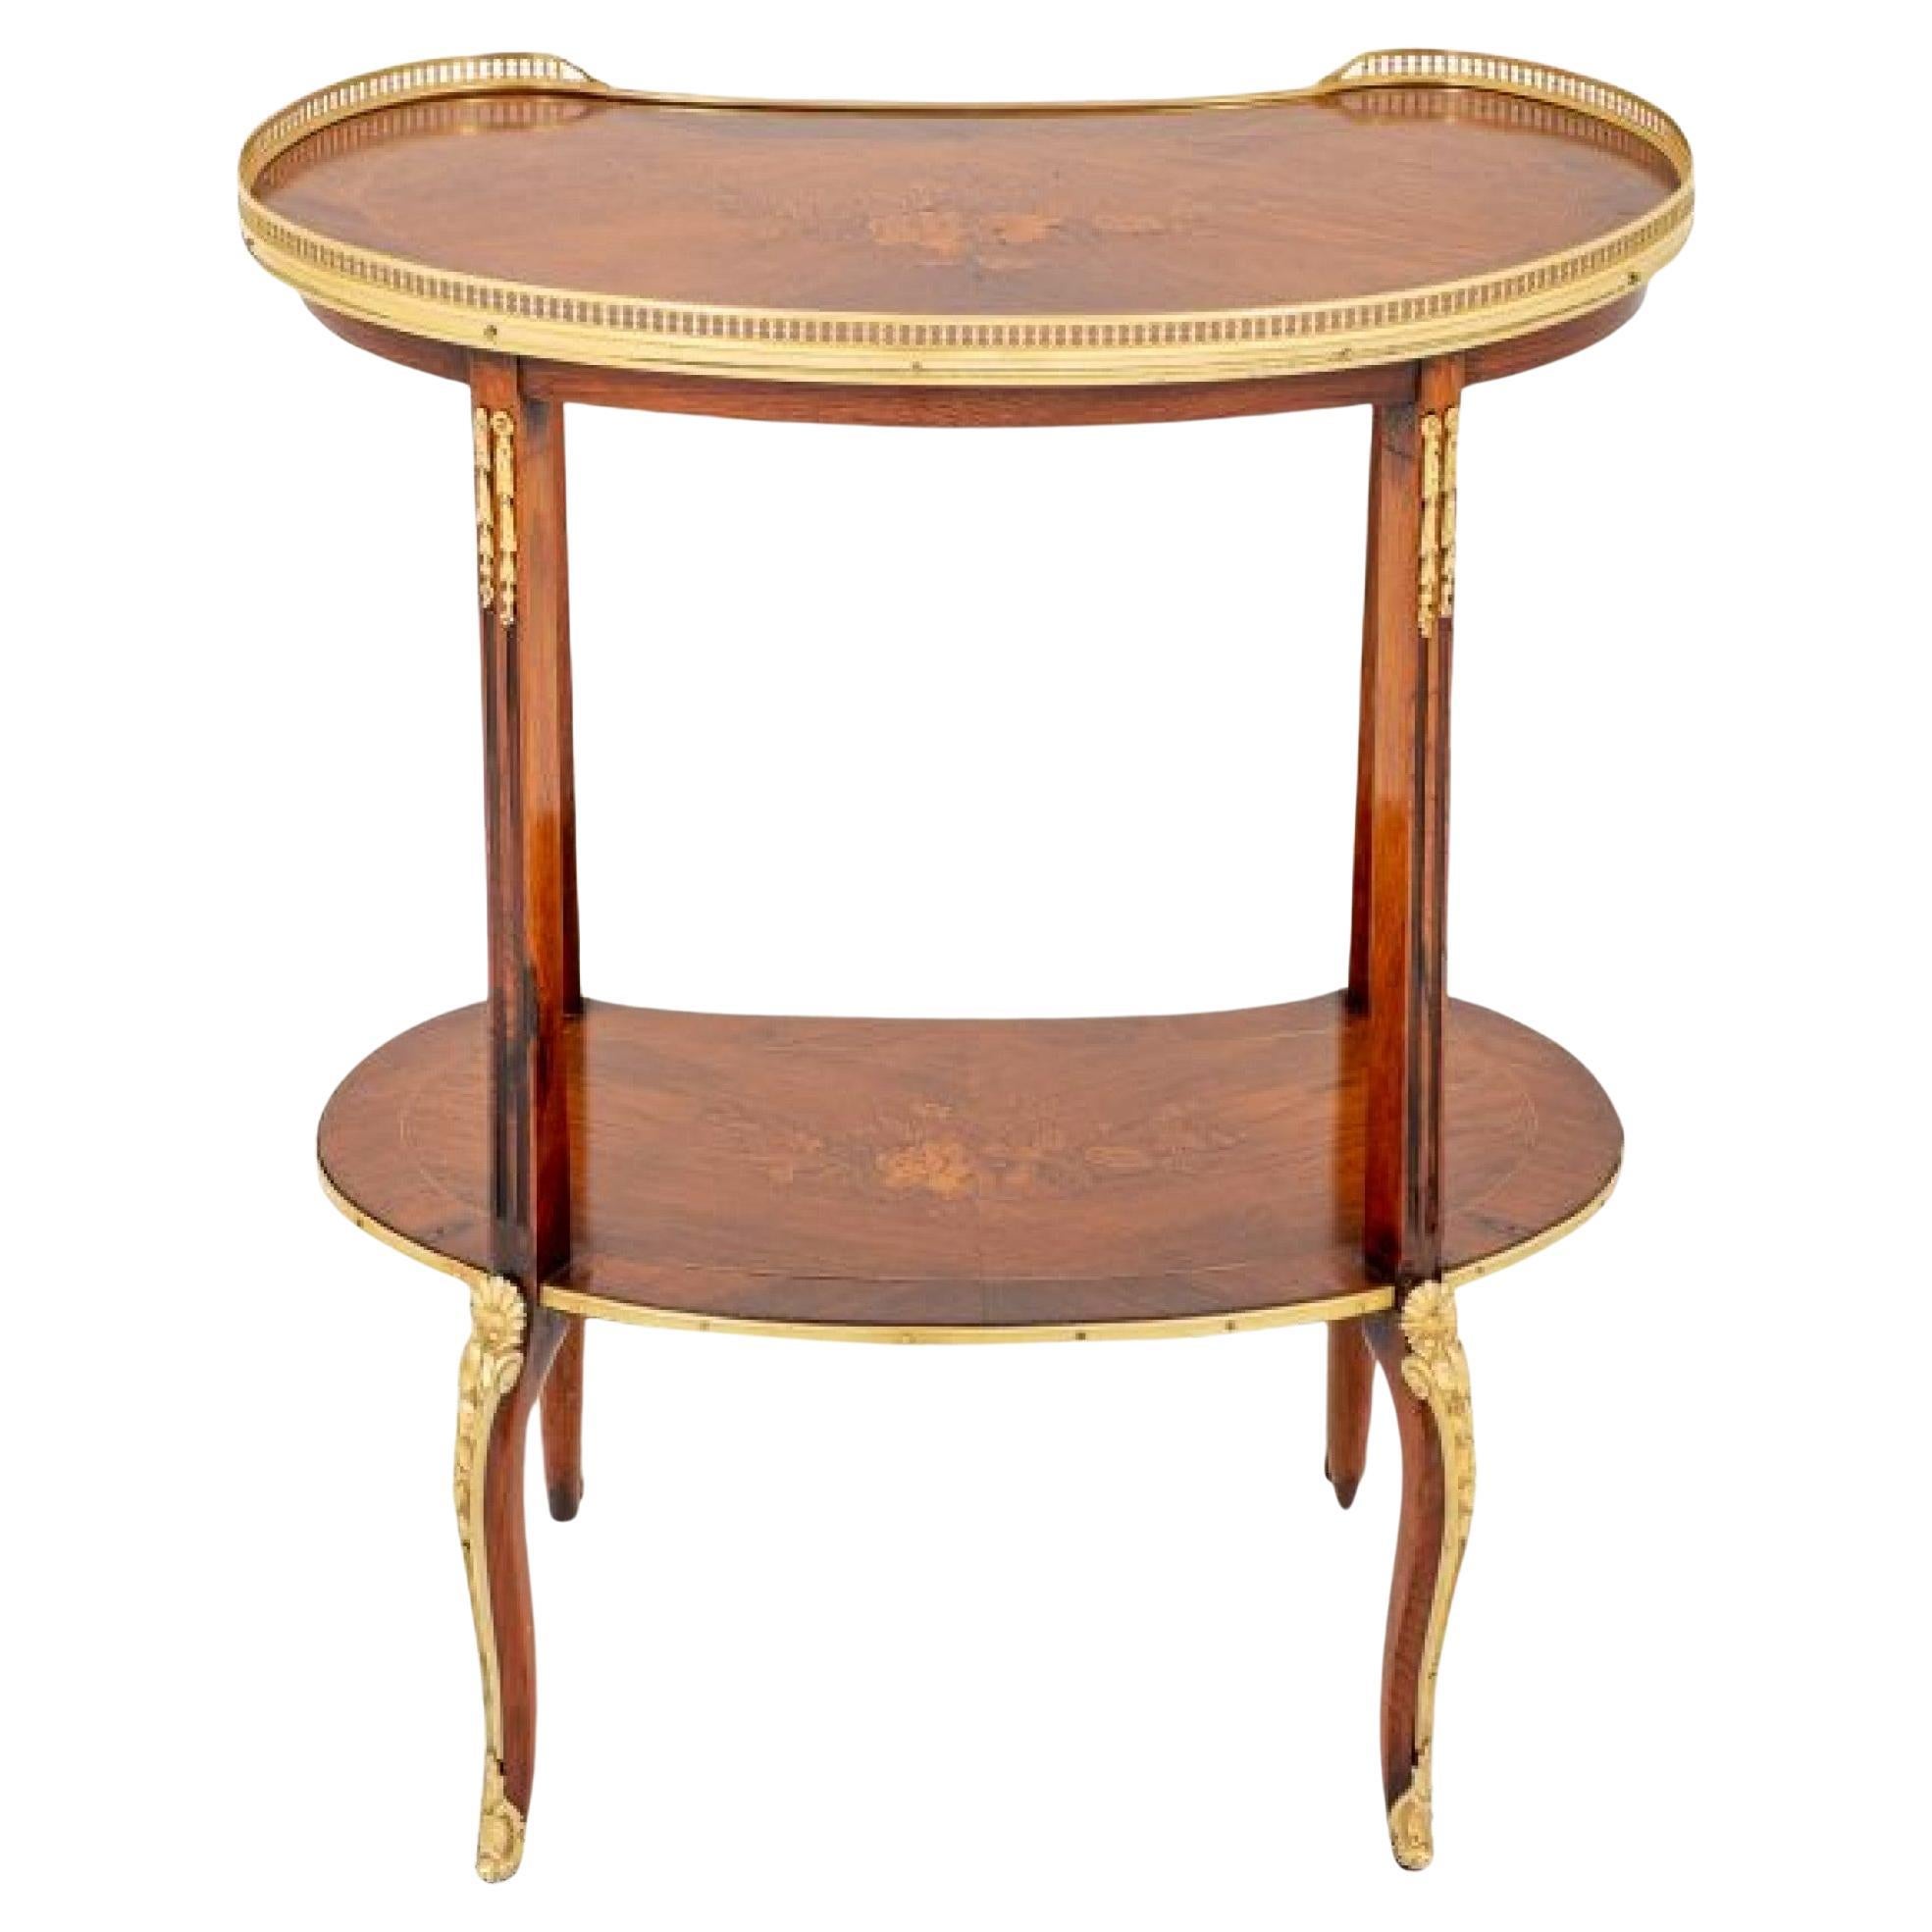 French Empire Side Table Kidney Bean Form